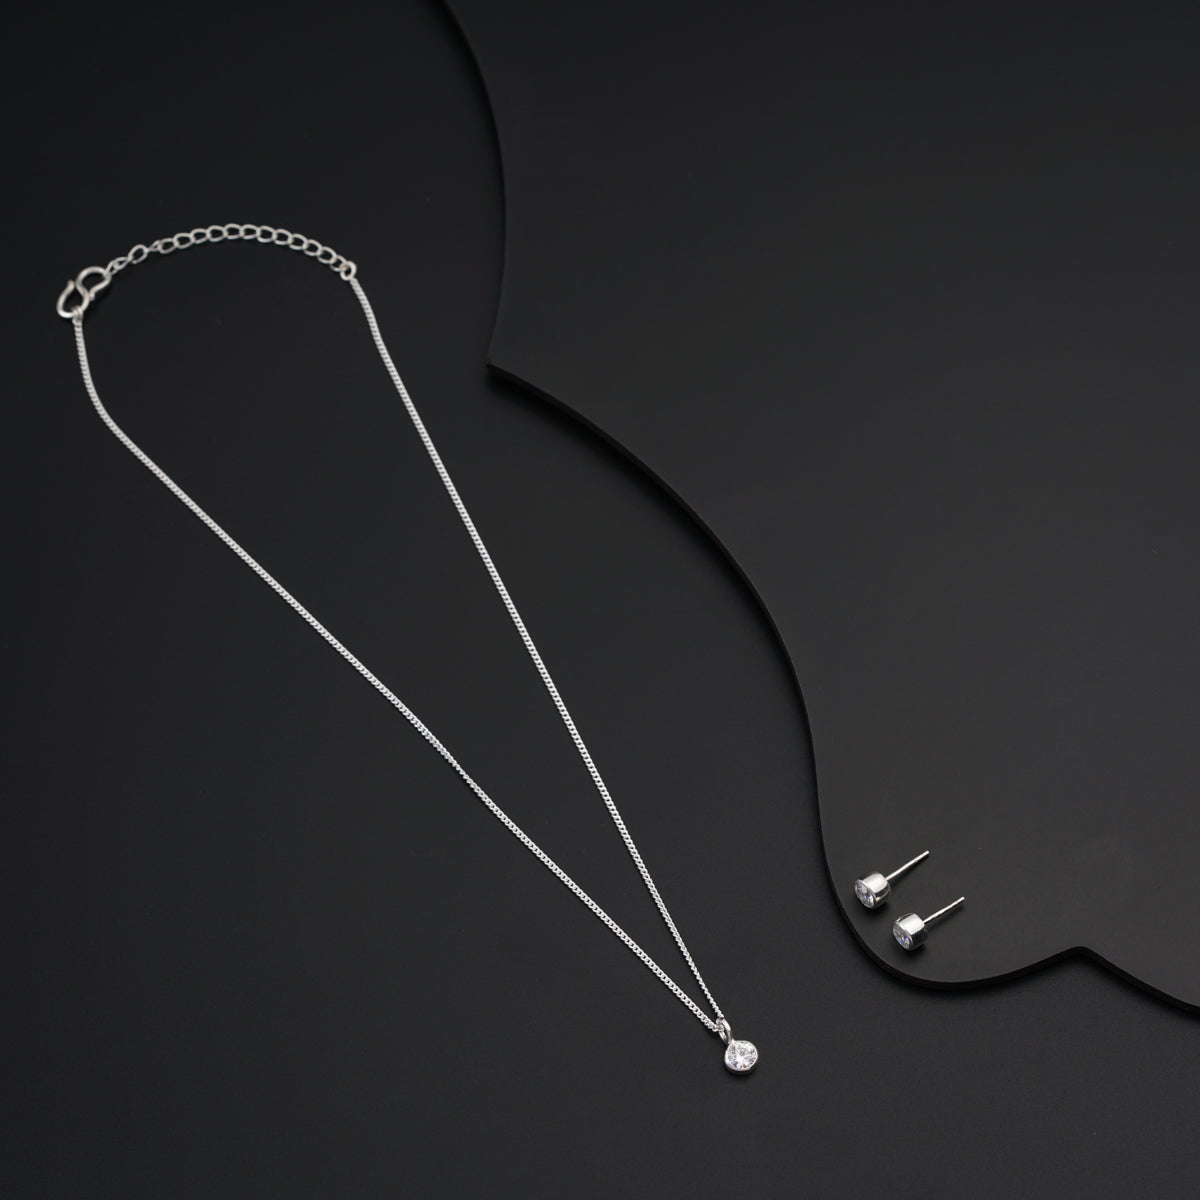 a necklace and earring on a black surface